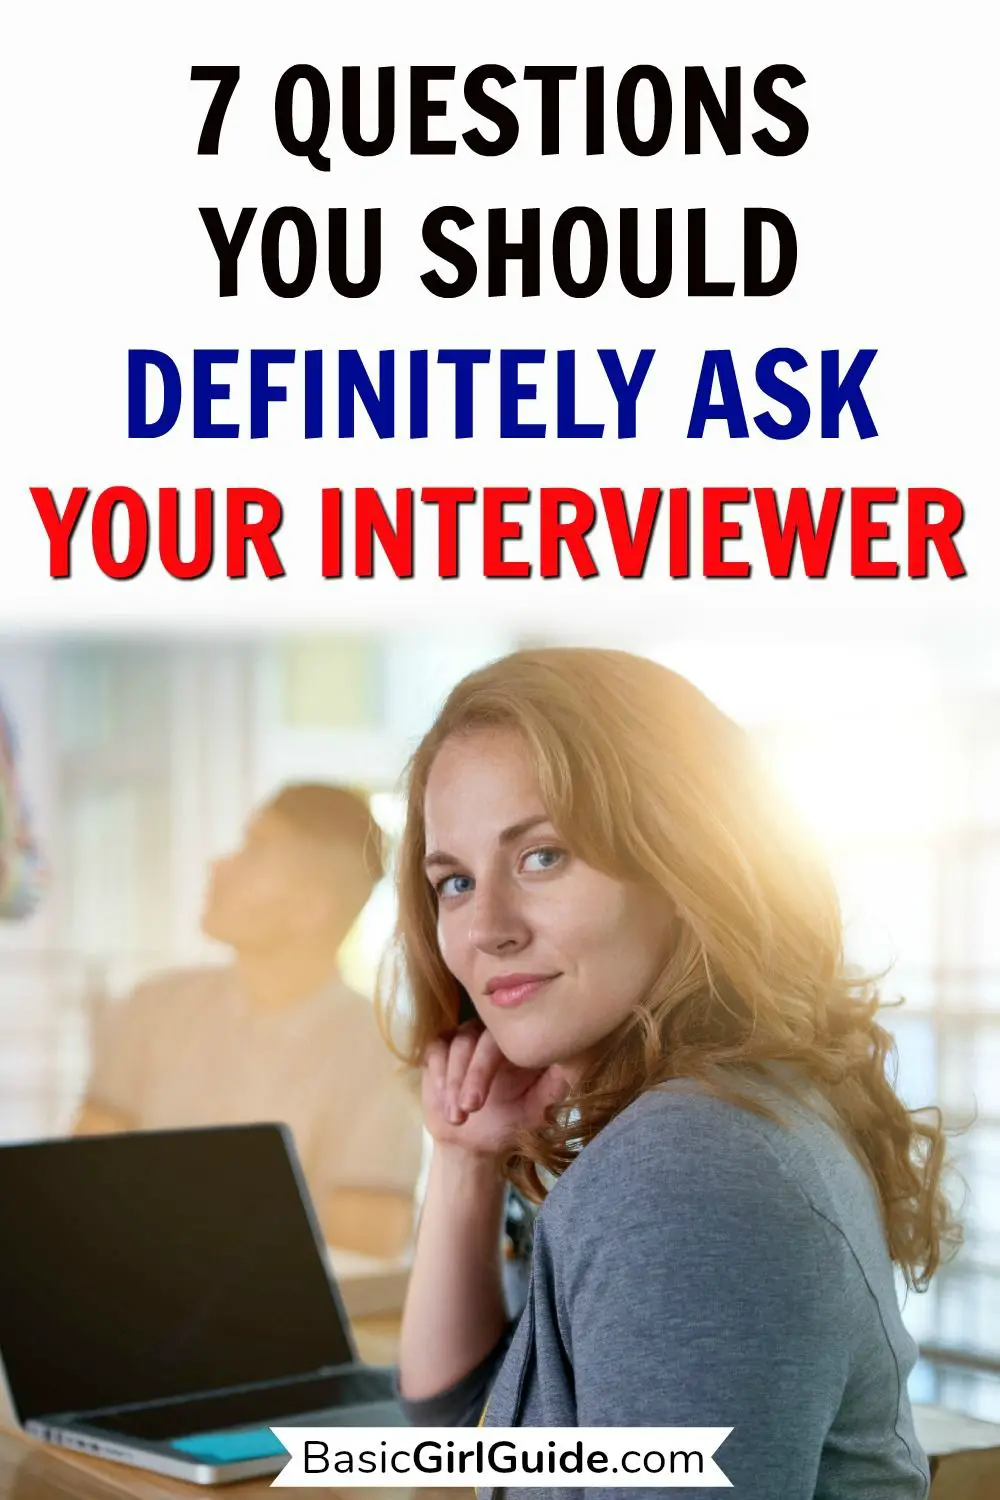 7 Questions You Should Definitely Ask Your Interviewer in 2020